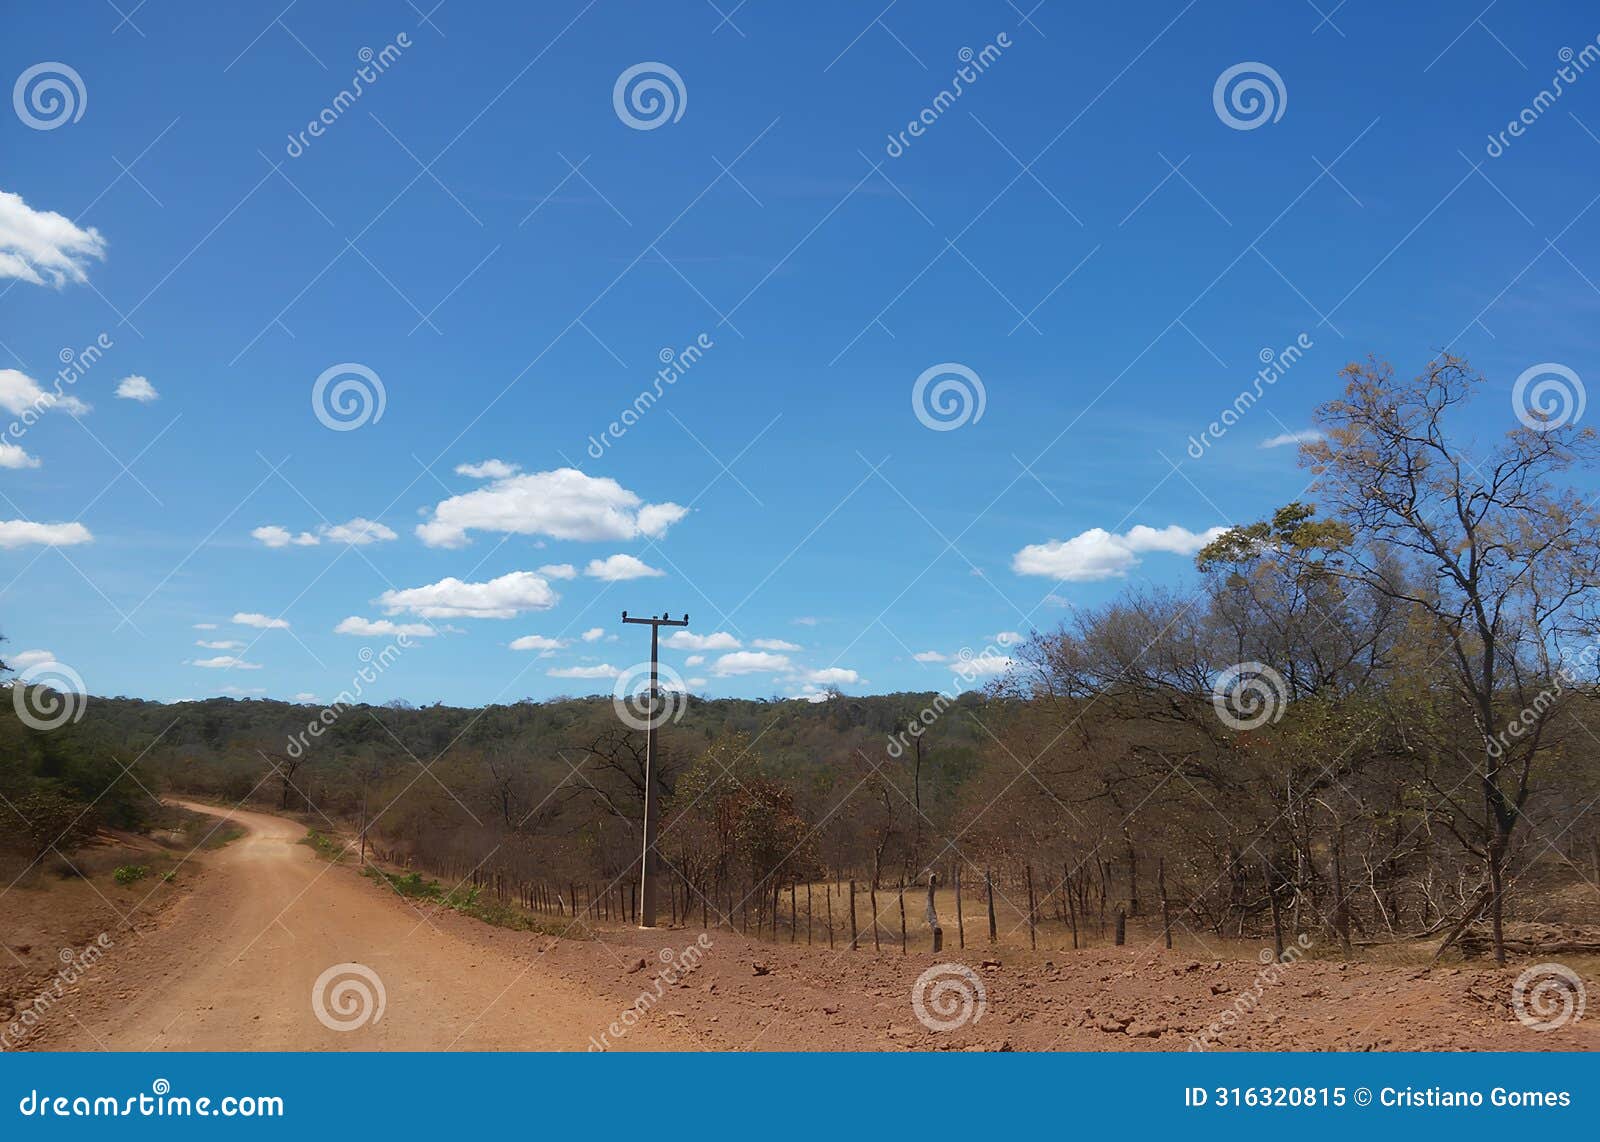 roads in the rural area of northeastern brazil that cuts through vegetation typical of the semi-arid area